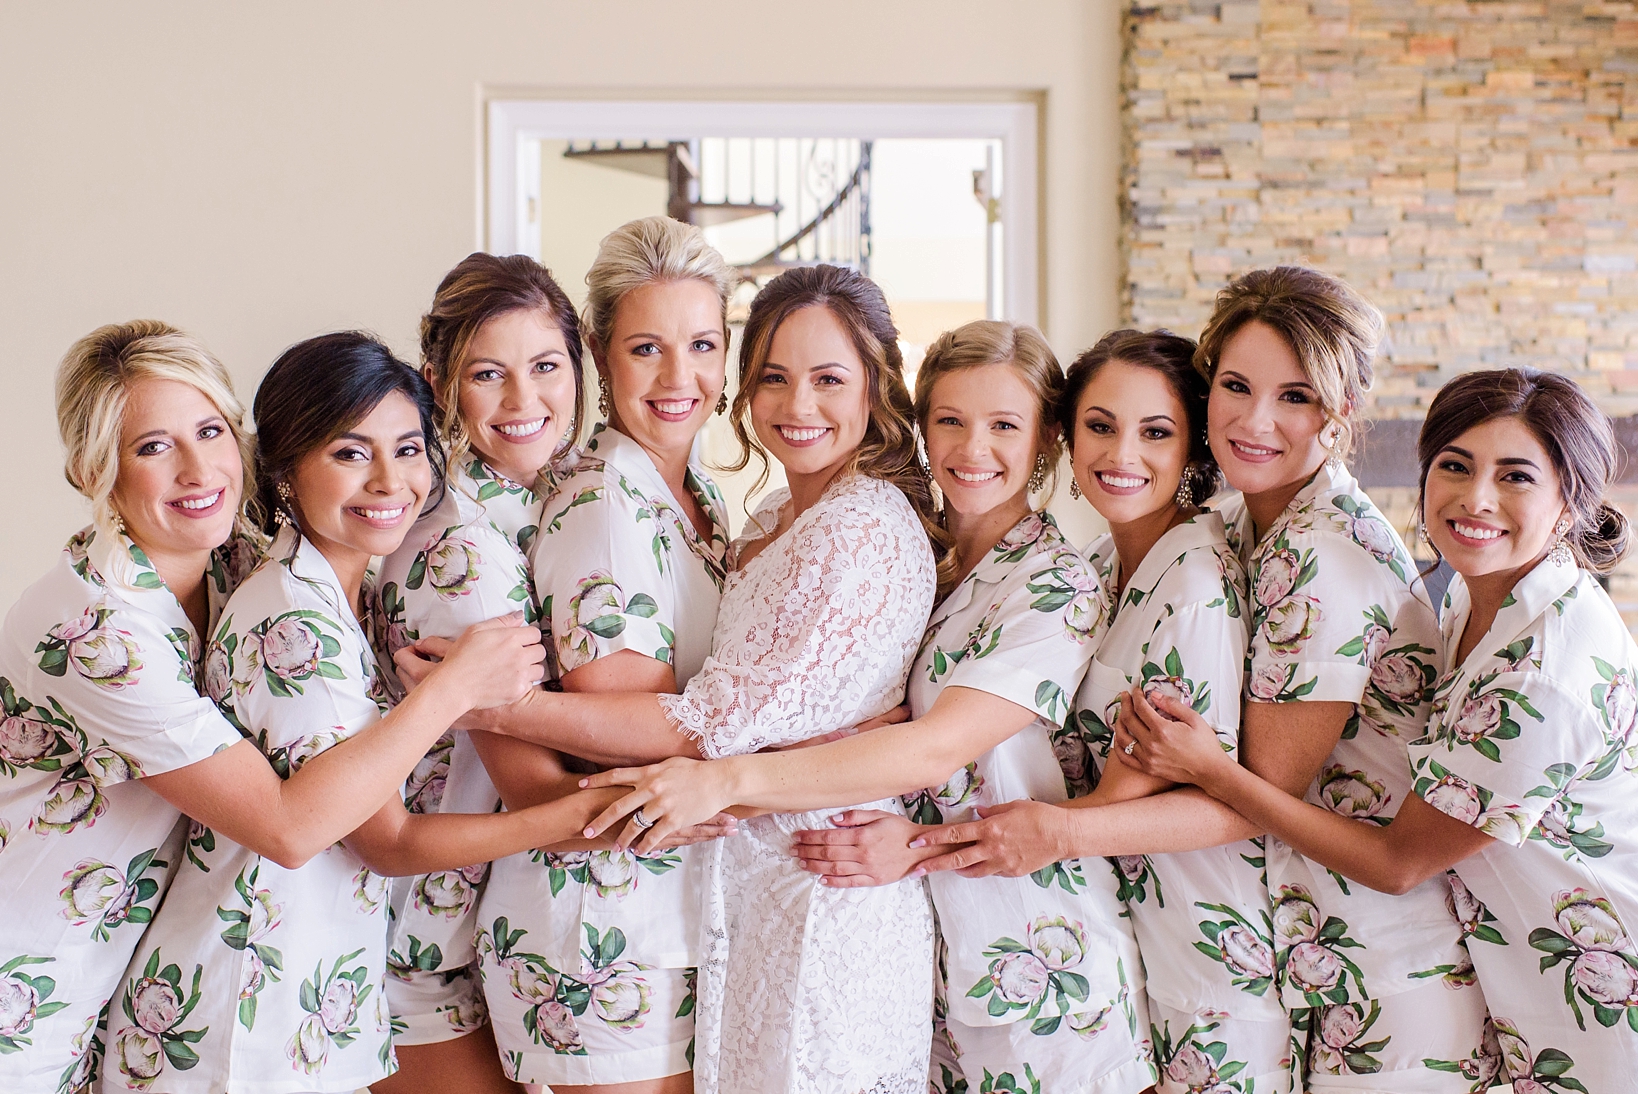 Bride and her bridesmaids in their matching robes